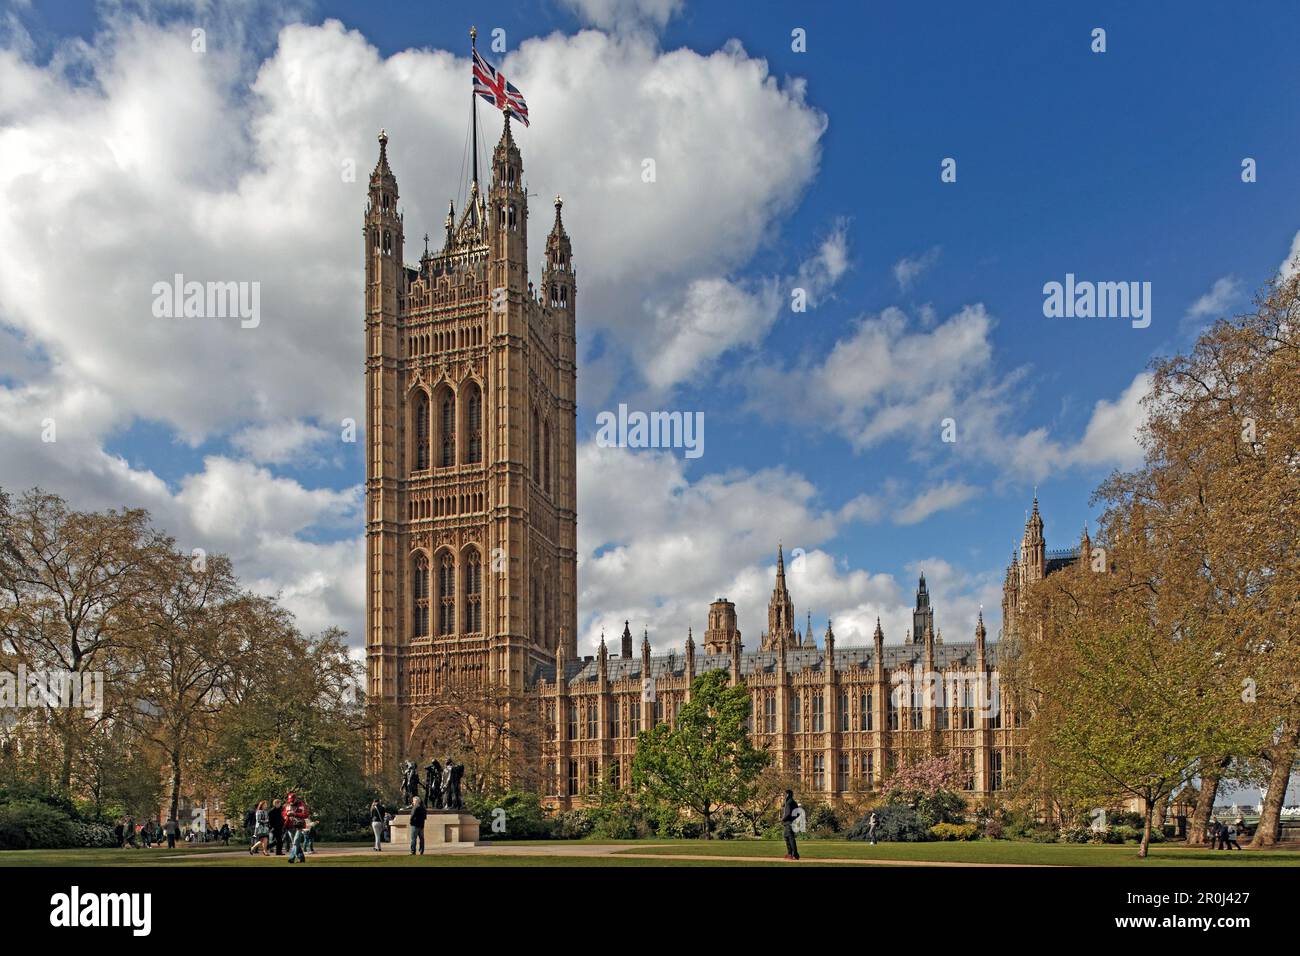 Victoria Tower Garden e Victoria Tower of the Houses of Parliament, Westminster, Londra, Inghilterra, Regno Unito Foto Stock